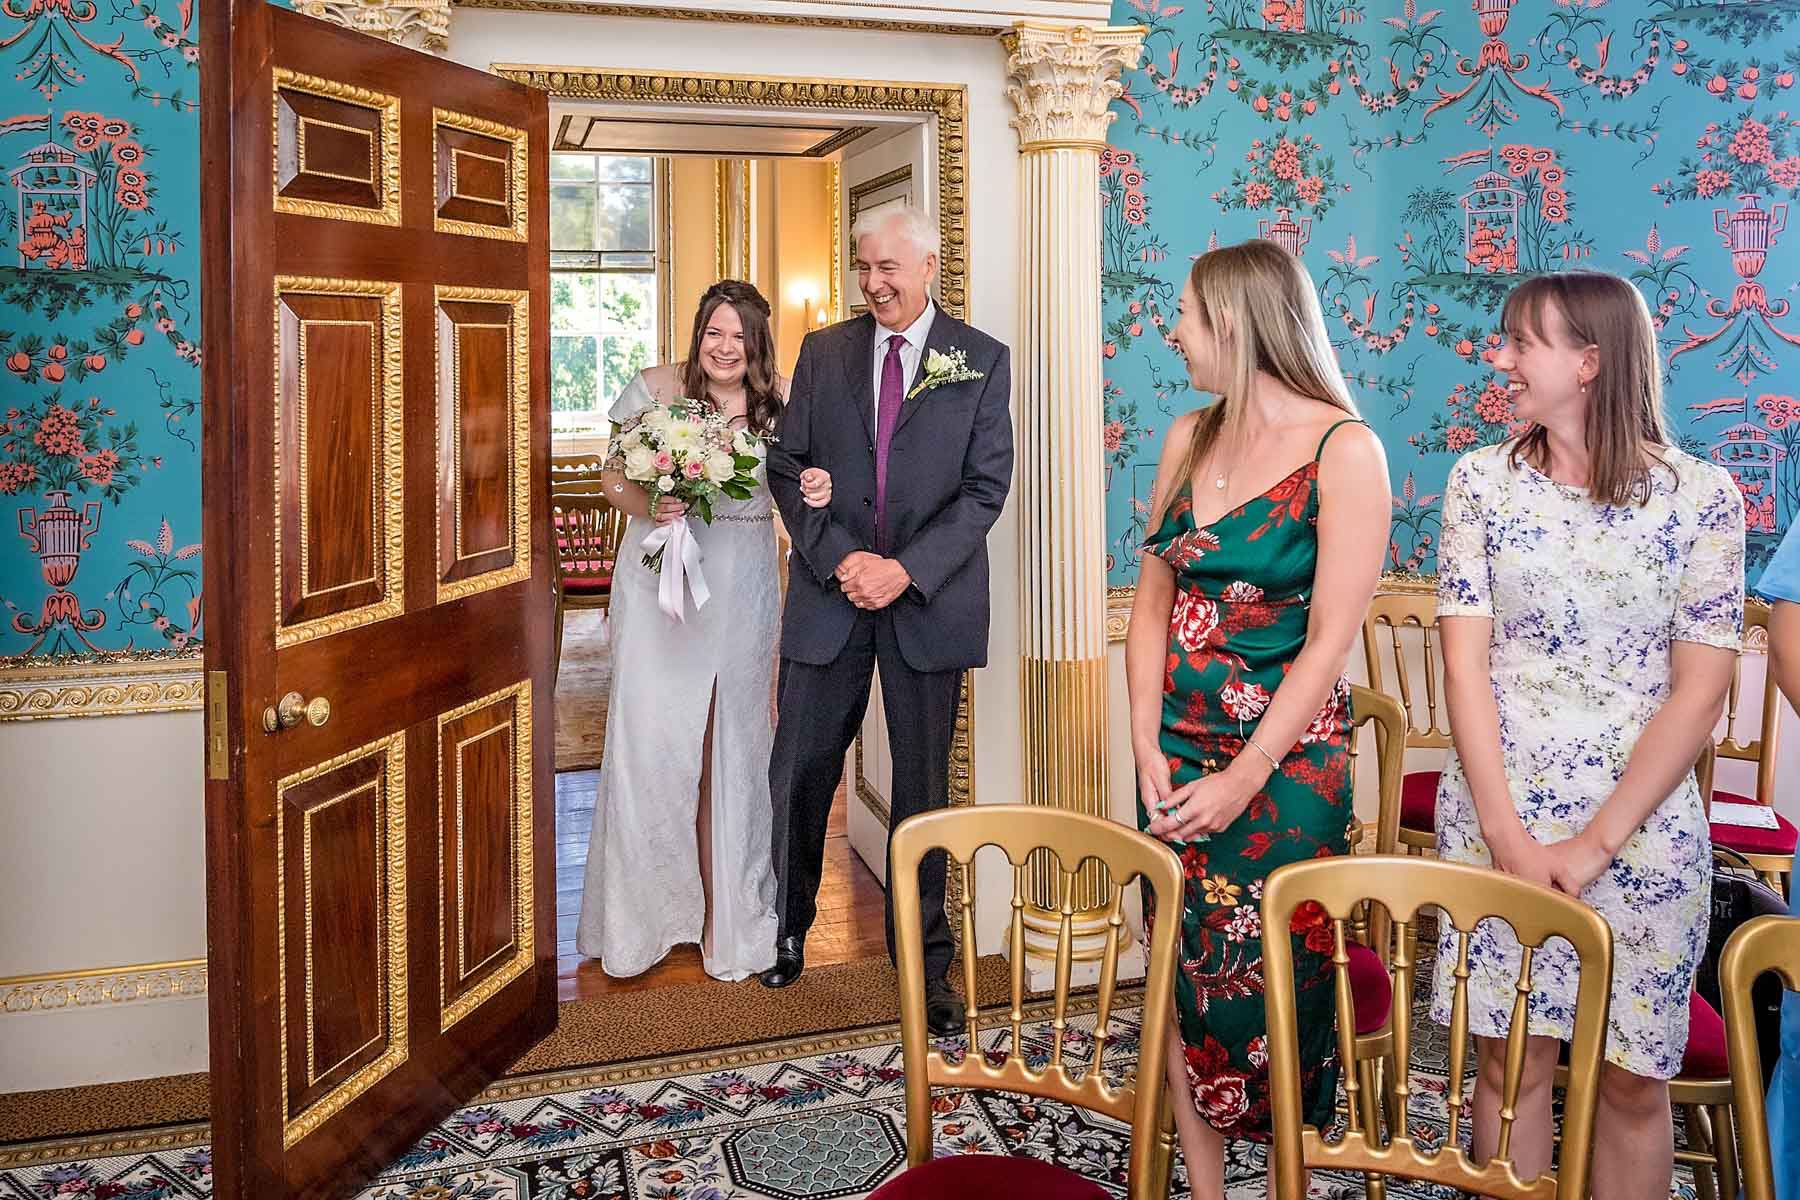 The bride enters the Salon at Danson House for her wedding ceremony. Walking with her father, she is peering in, looking for the groom as guests look on.